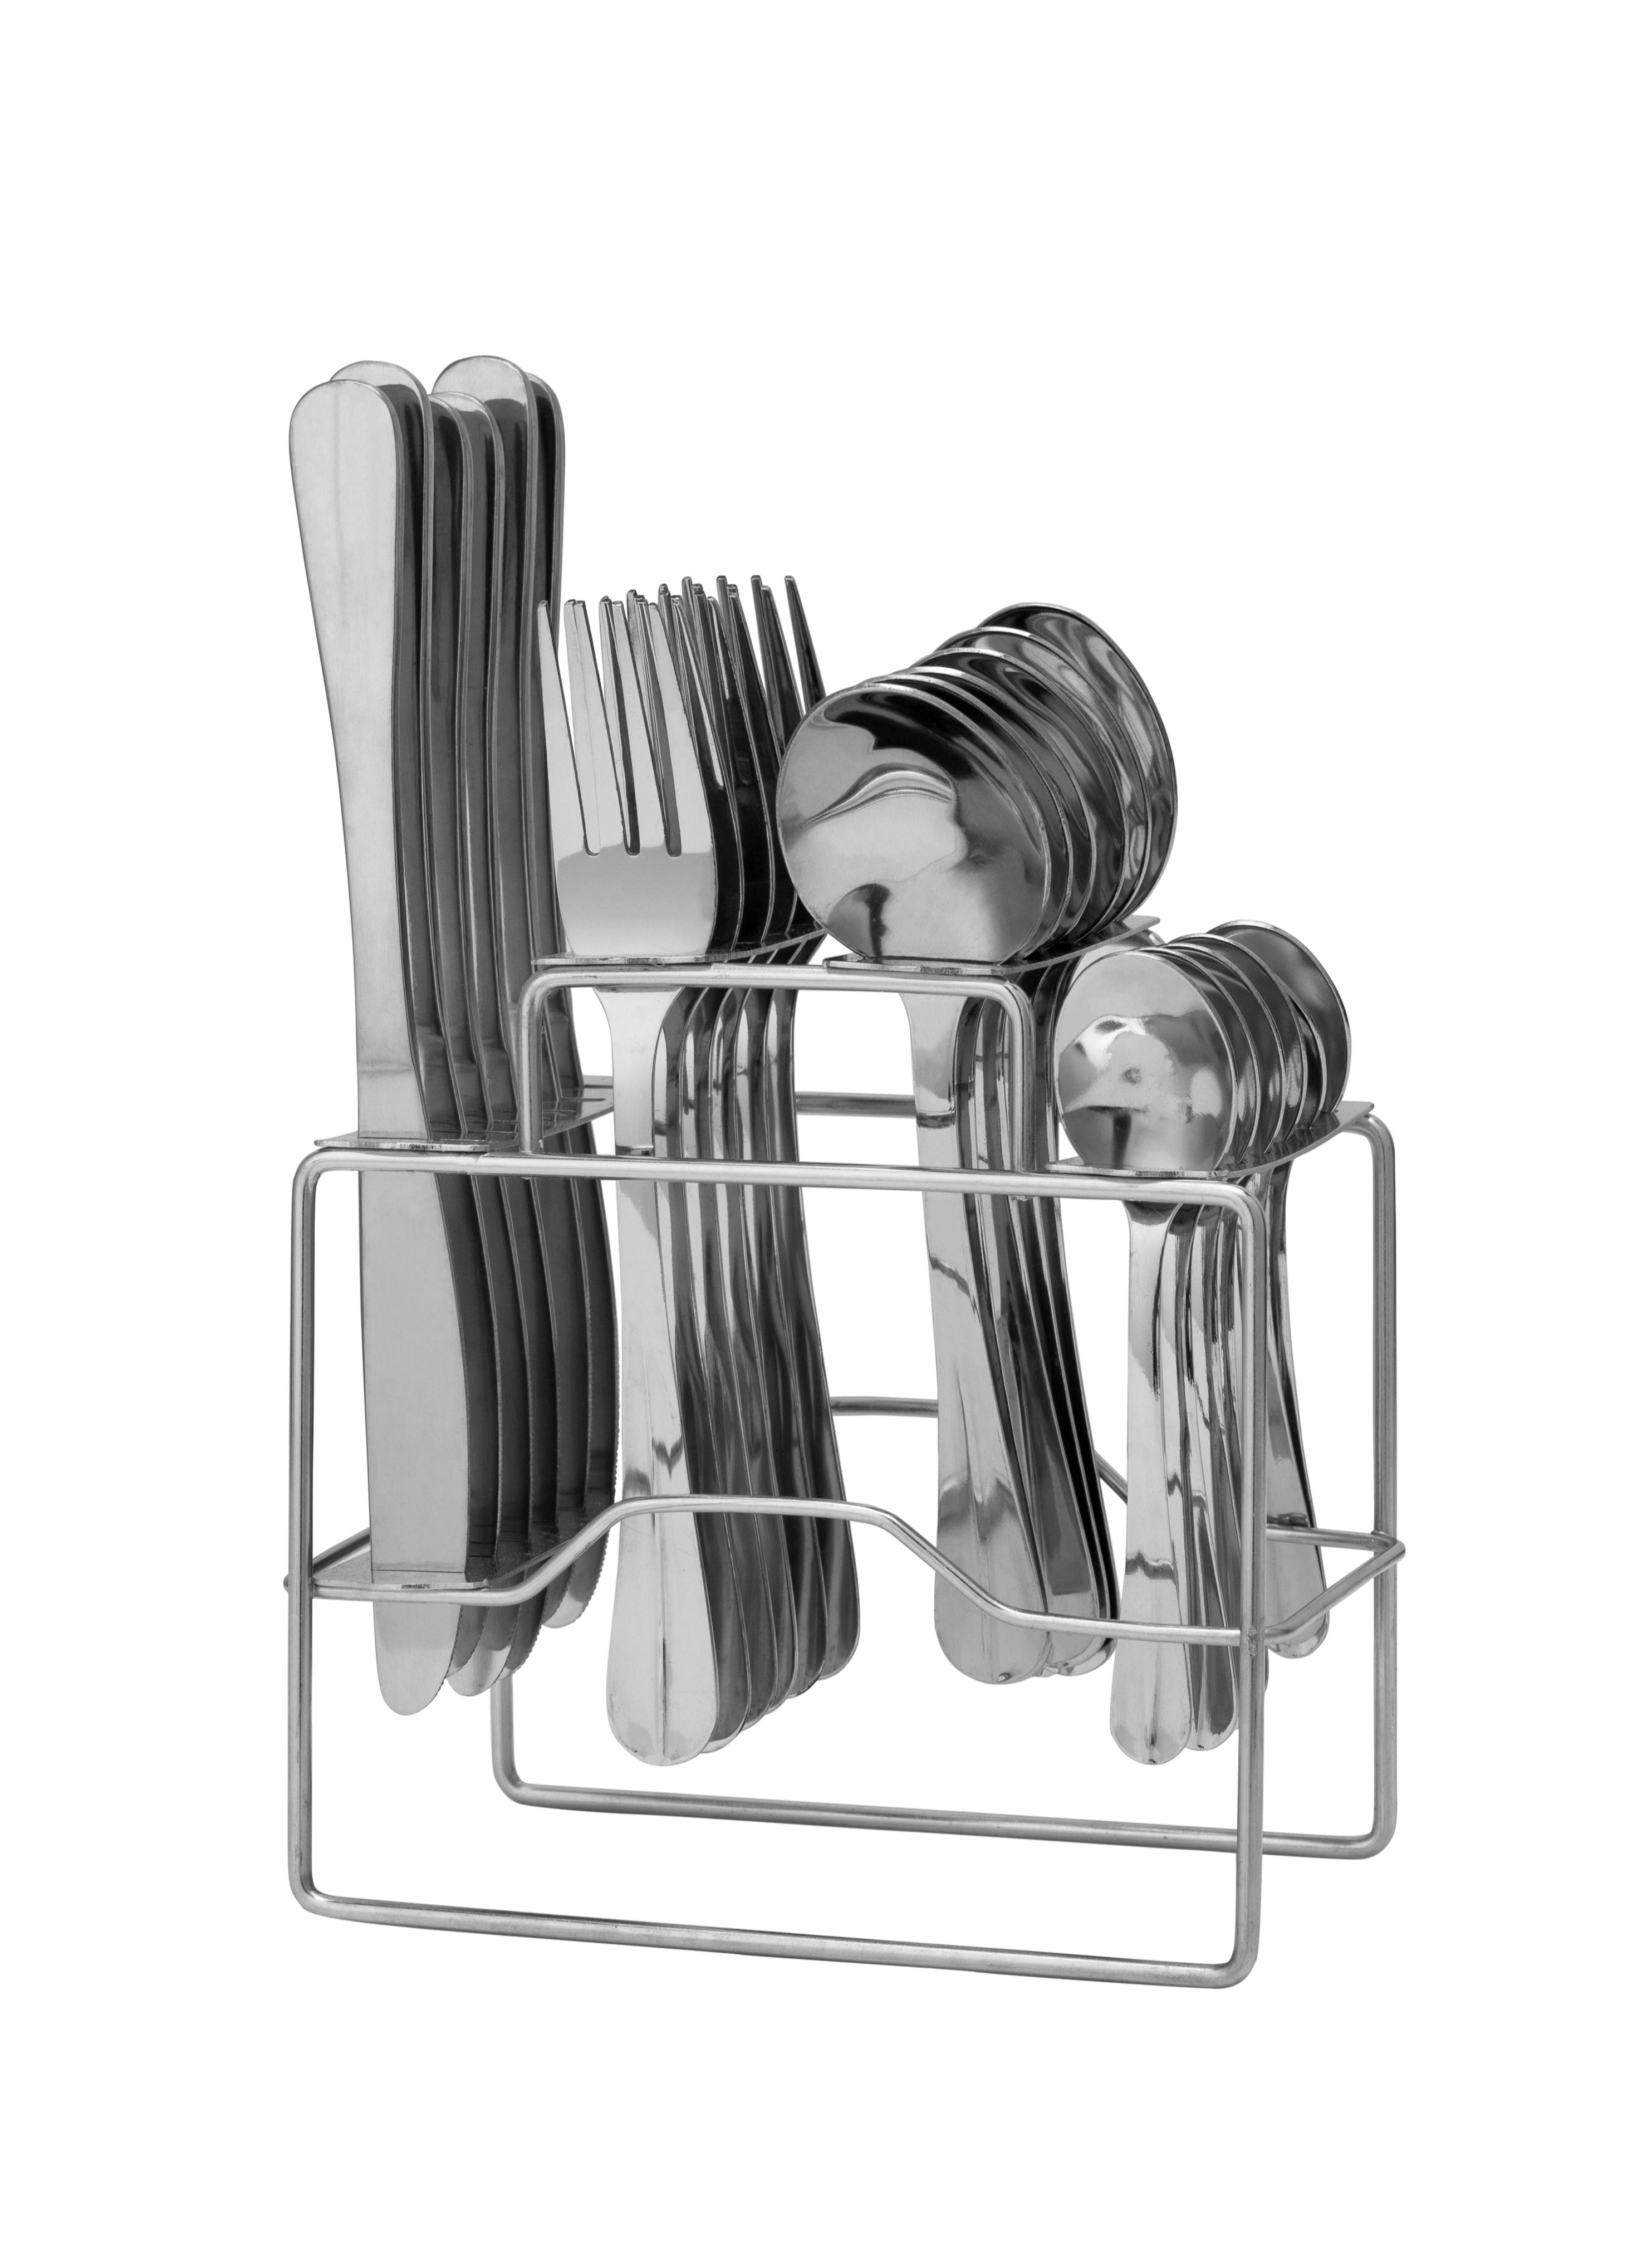 Delcasa Stainless Steel 24pcs Cutlery Set with stand DC2479 made in India 